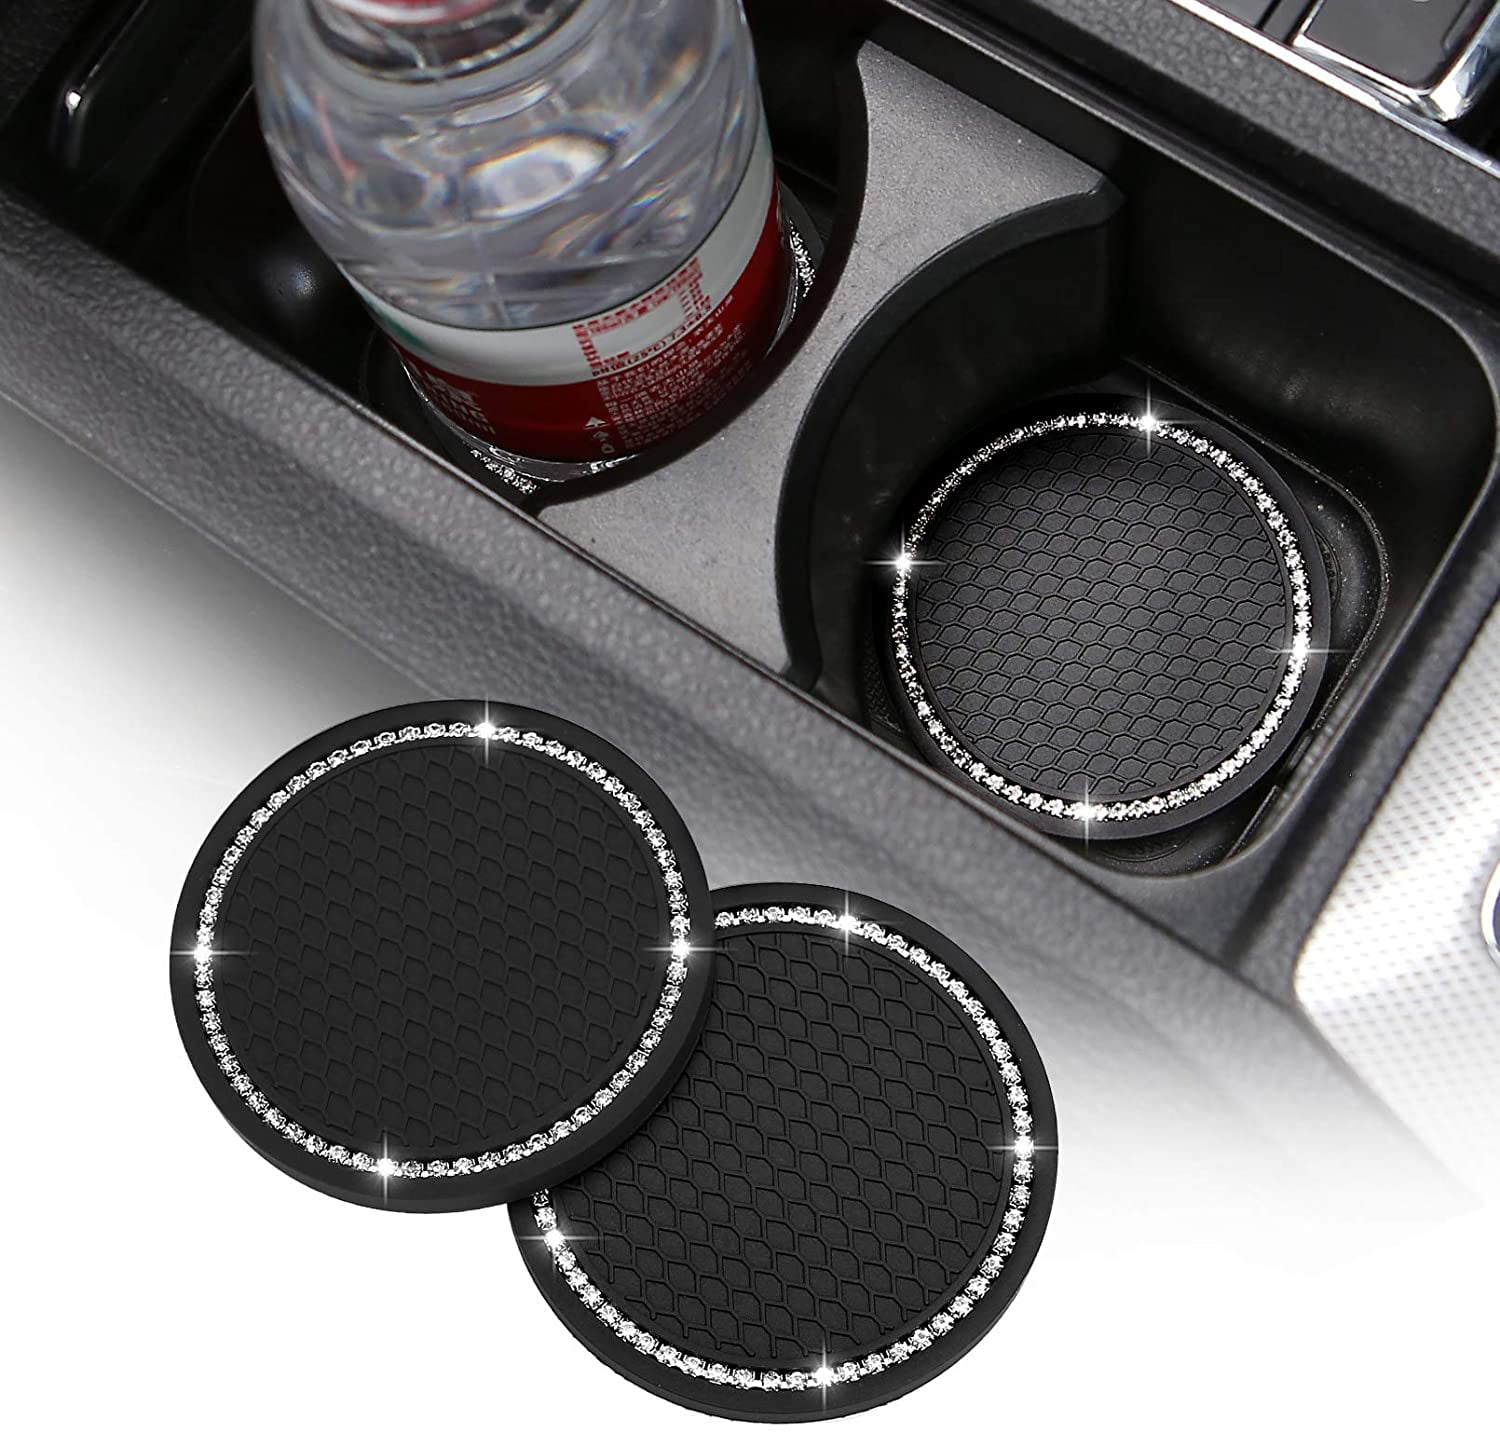 4 Pack Bling Car Cup Holder Coaster 2.75 Inch Soft Bling Crystal Rhinestone Rubber Pad Set Black Round Auto Cup Holder Insert Drink Coaster Car Interior Accessories